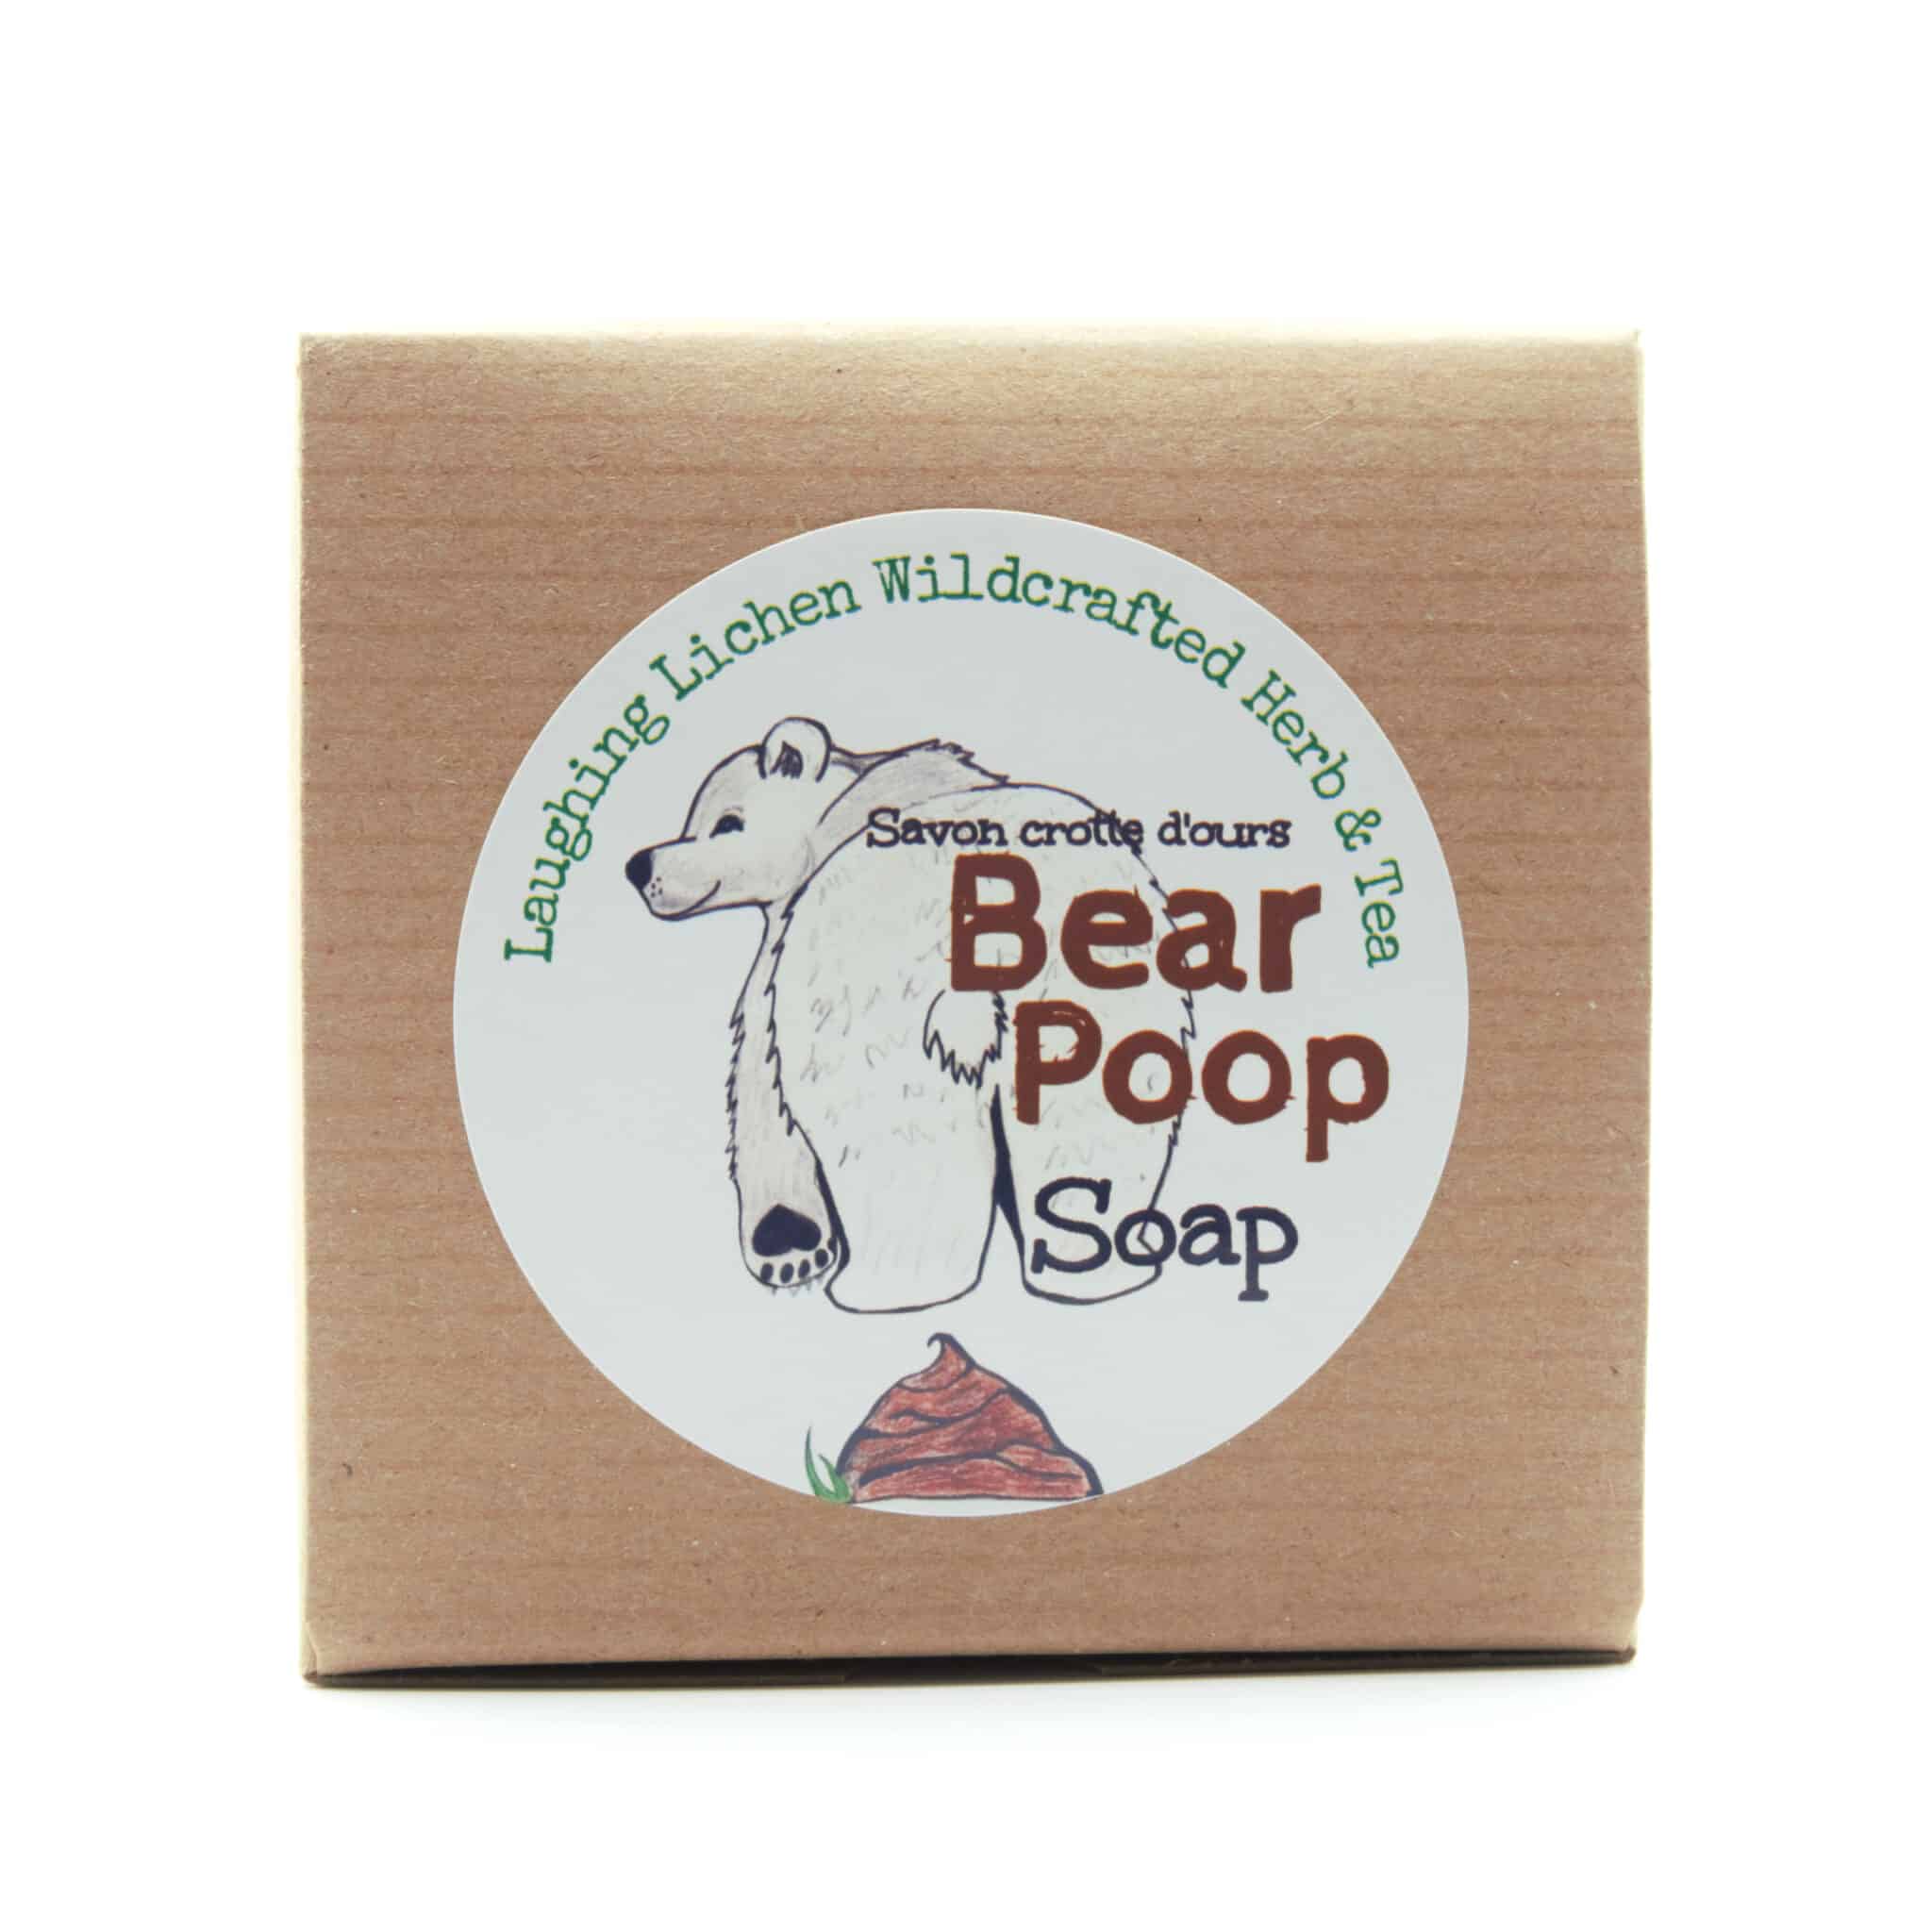 https://laughinglichen.ca/wp-content/uploads/2017/02/Bear-Poop-Soap-1-2-scaled.jpg